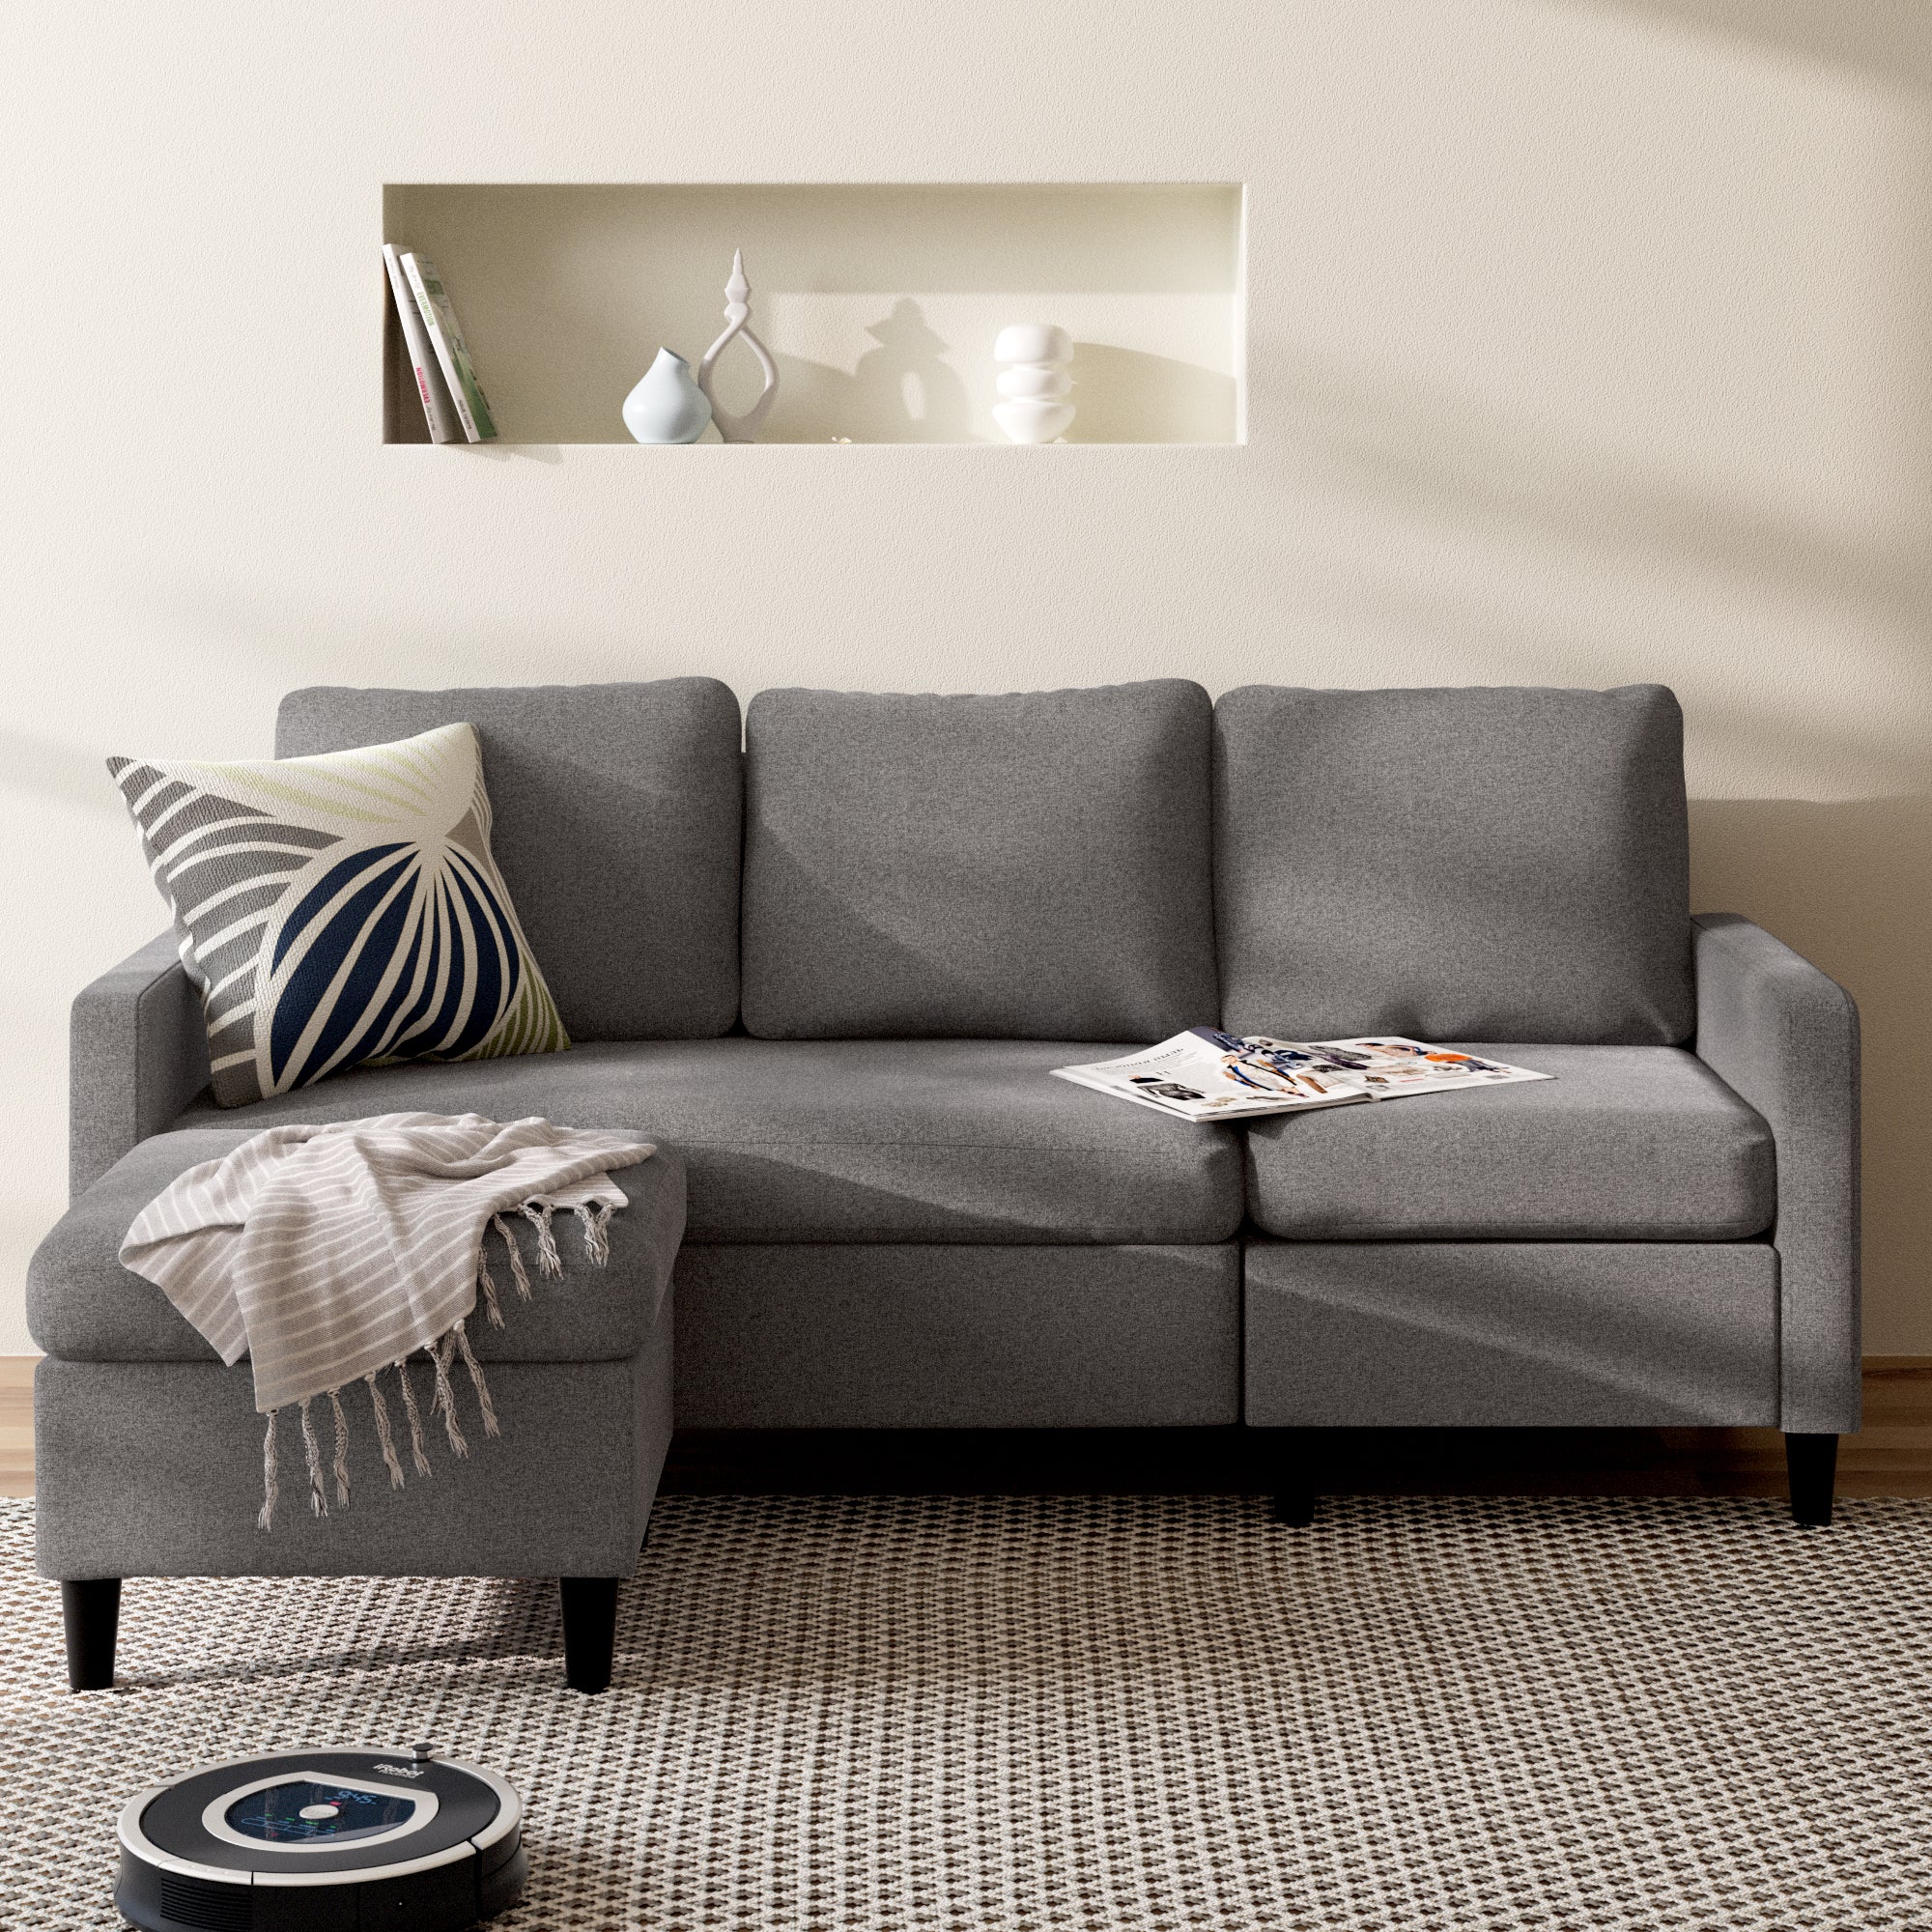 Grey Couch Living Room Ideas  Grey couch living room, Couches living room,  Grey sofa living room